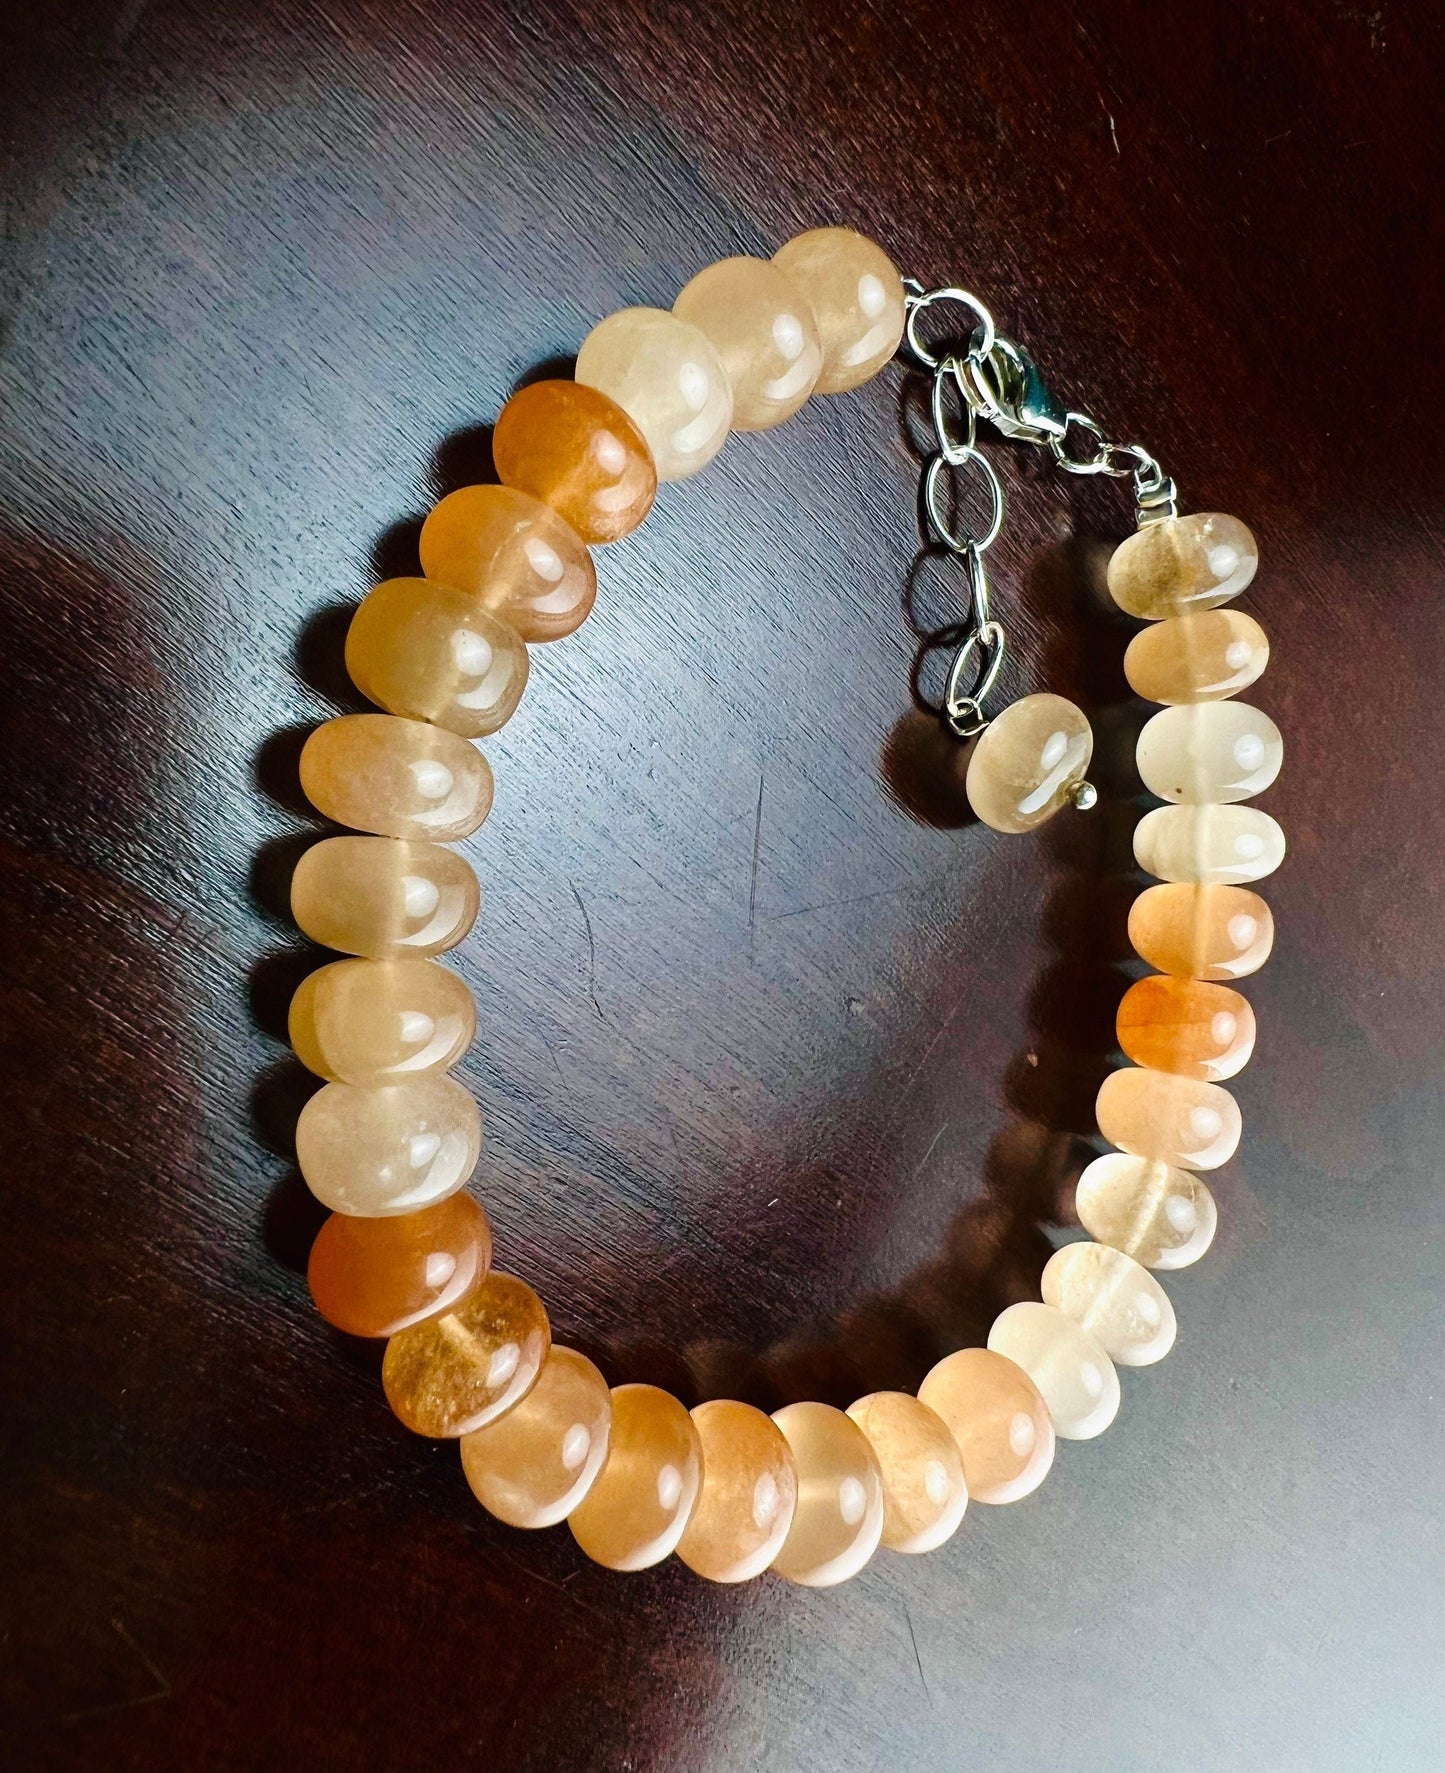 Natural Peach Moonstone 2 tone smooth roundel 8-8.5mm large multi peachy pink with 925 sterling silver Bracelet with 1” extension